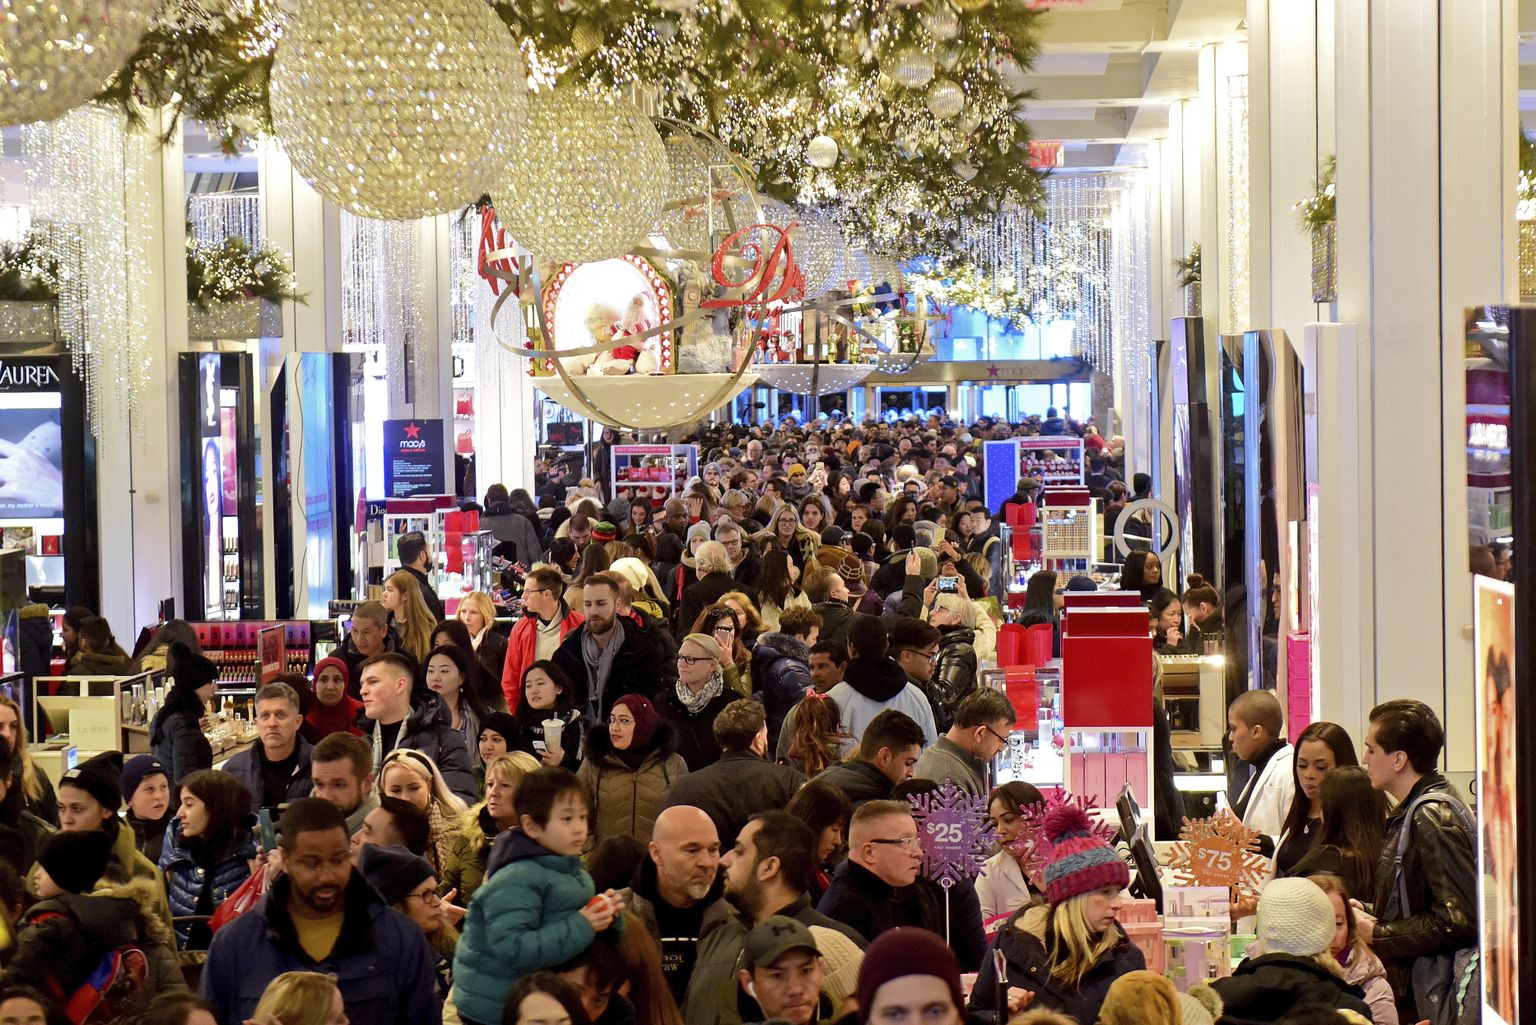 IMAGE DISTRIBUTED FOR MACY'S - Macy's Herald Square opens its doors at 5 p.m. on Thanksgiving Day for thousands of Black Friday shoppers in search of amazing sales and doorbuster deals, Thursday, Nov. 28, 2019 in New York. (Diane Bondareff/AP Images for Macy's)